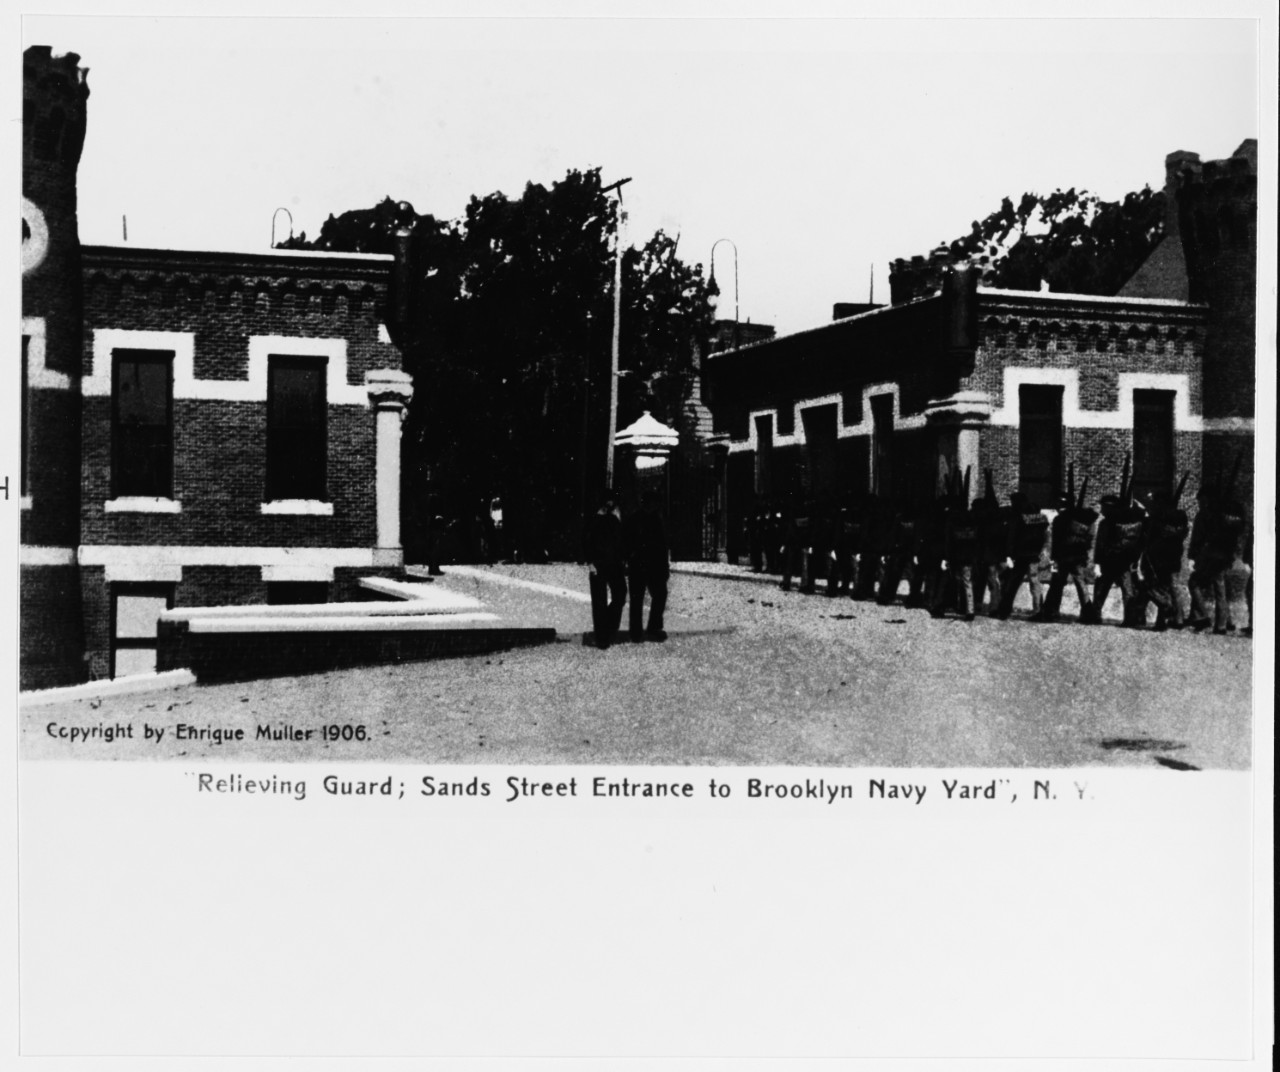 Relieving Guard:  Sands Street Entrance, New York Navy Yard.